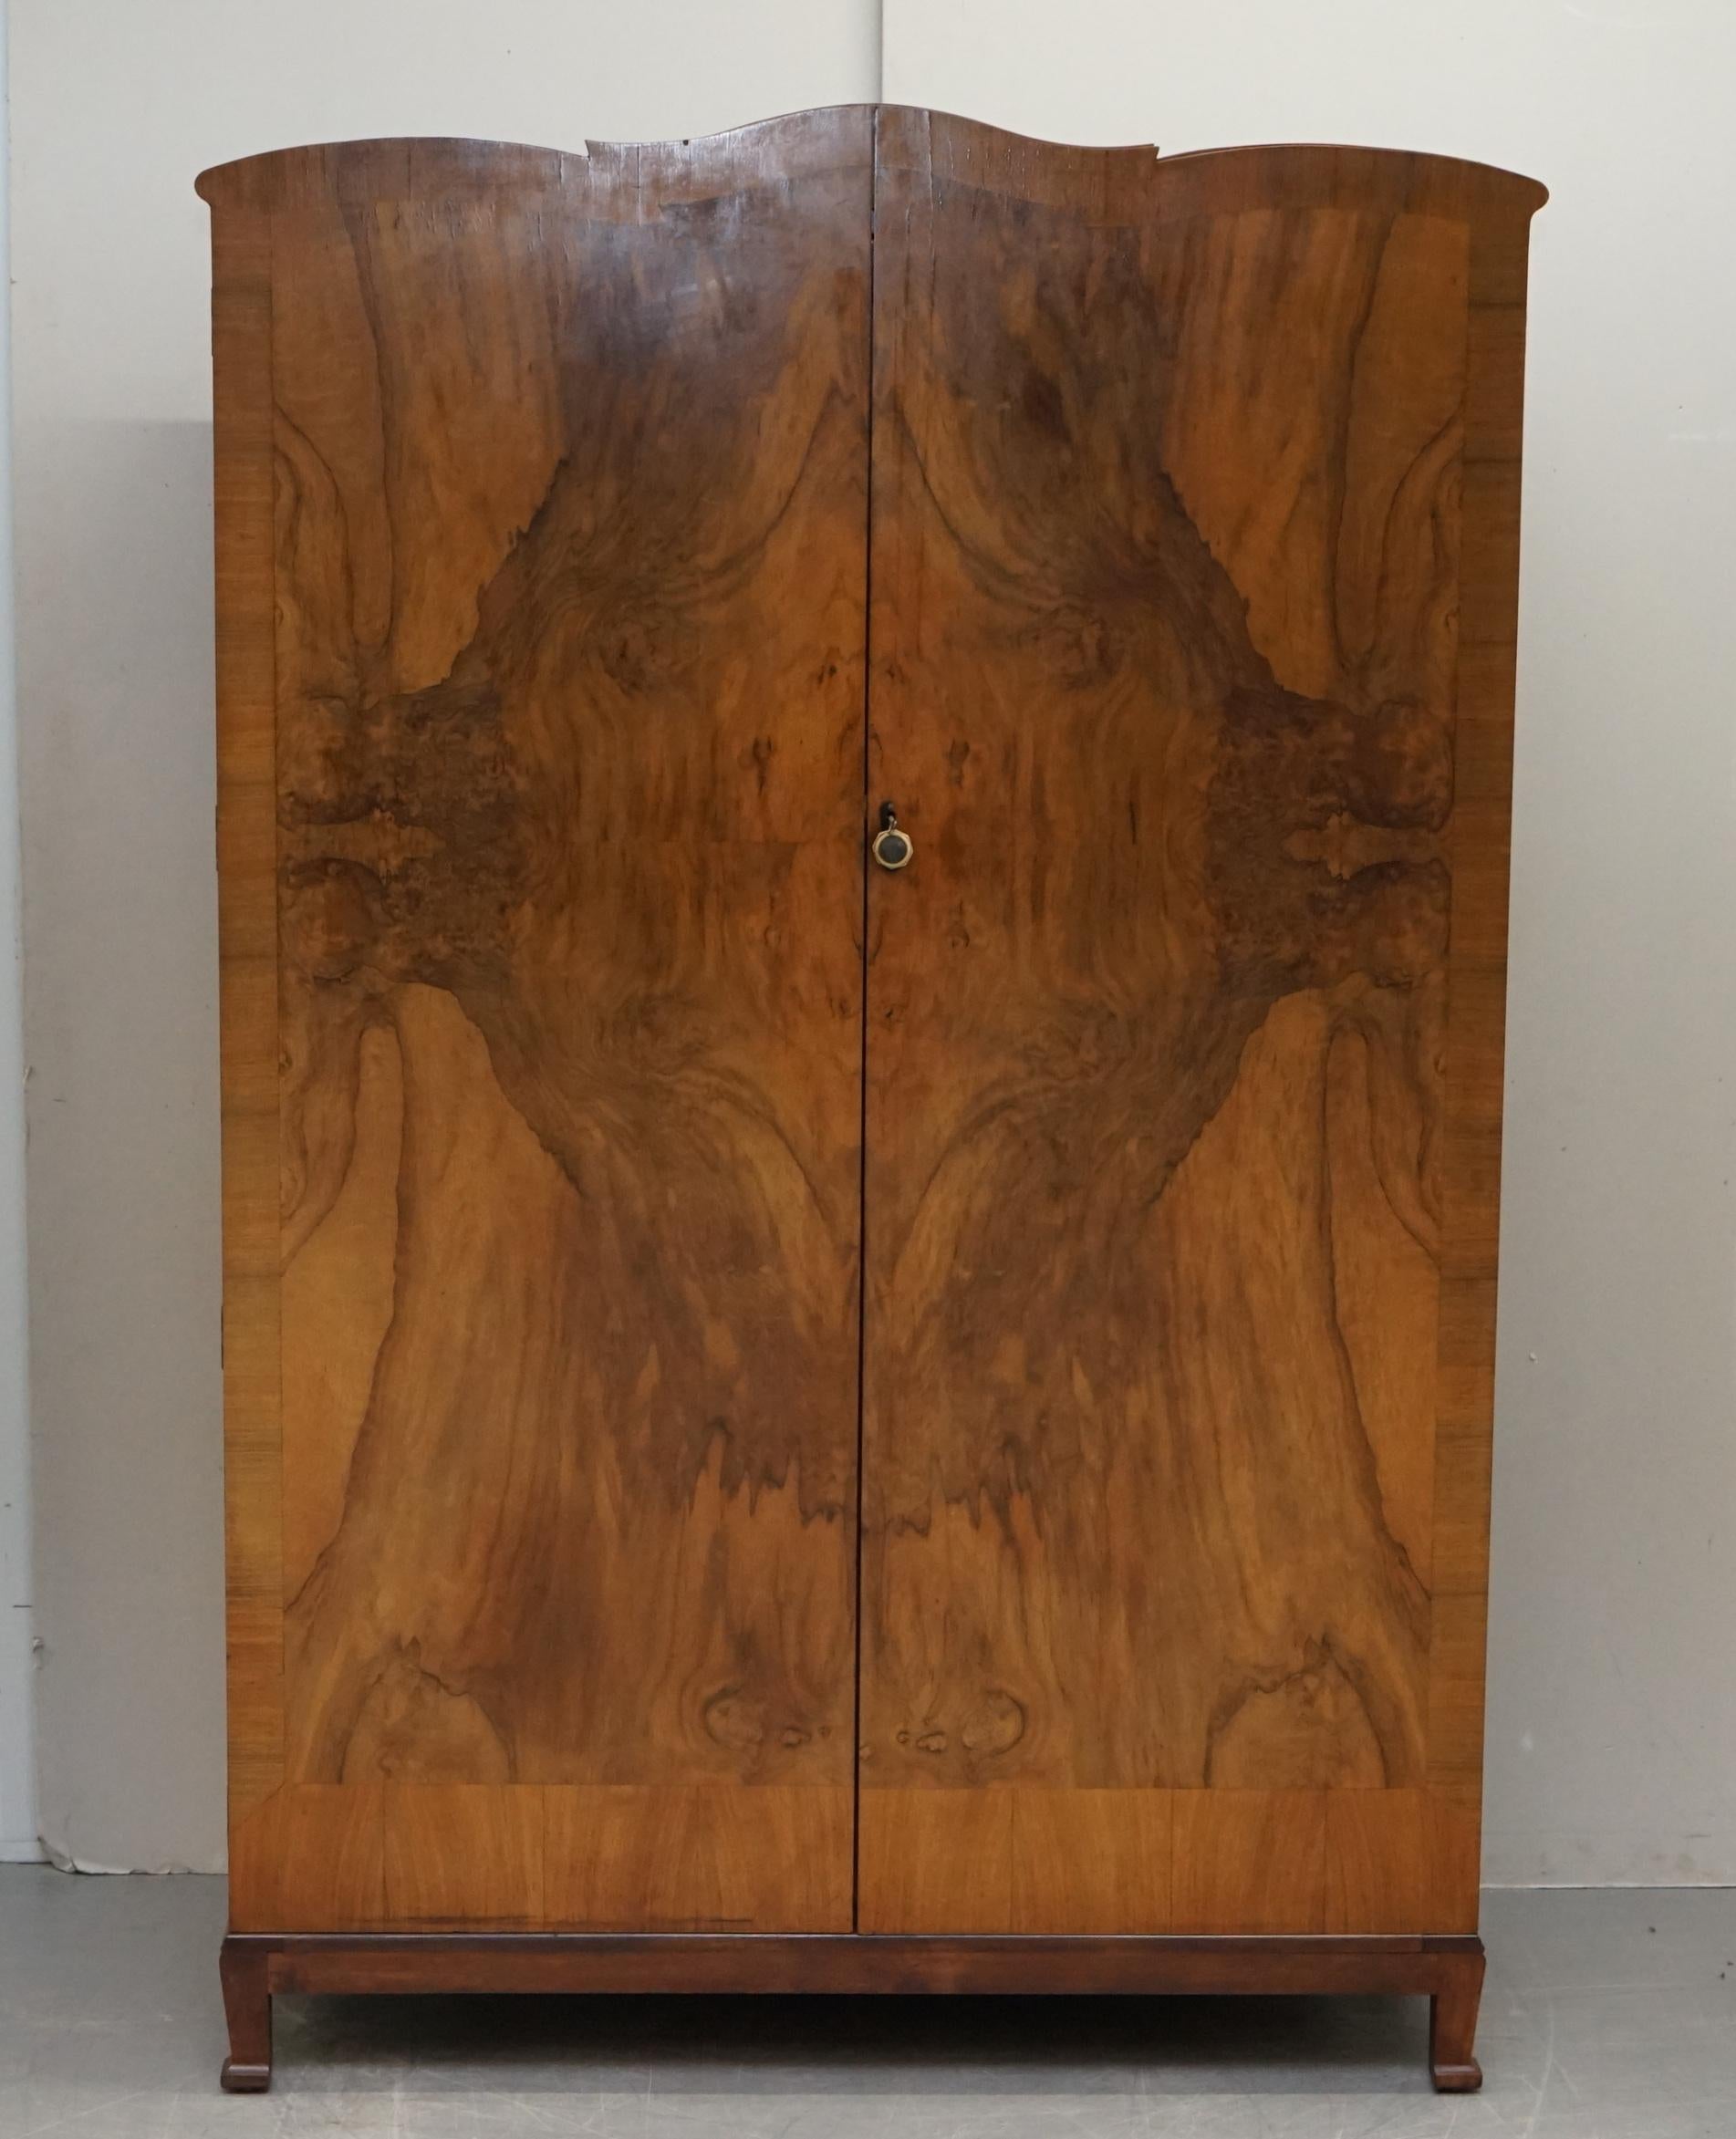 We are delighted to offer for sale this stunning burr walnut vintage circa 1940's double bank wardrobe with built in mirror

This is a very good looking well made and decorative piece, the door panels have rich warm burr walnut which glows in the